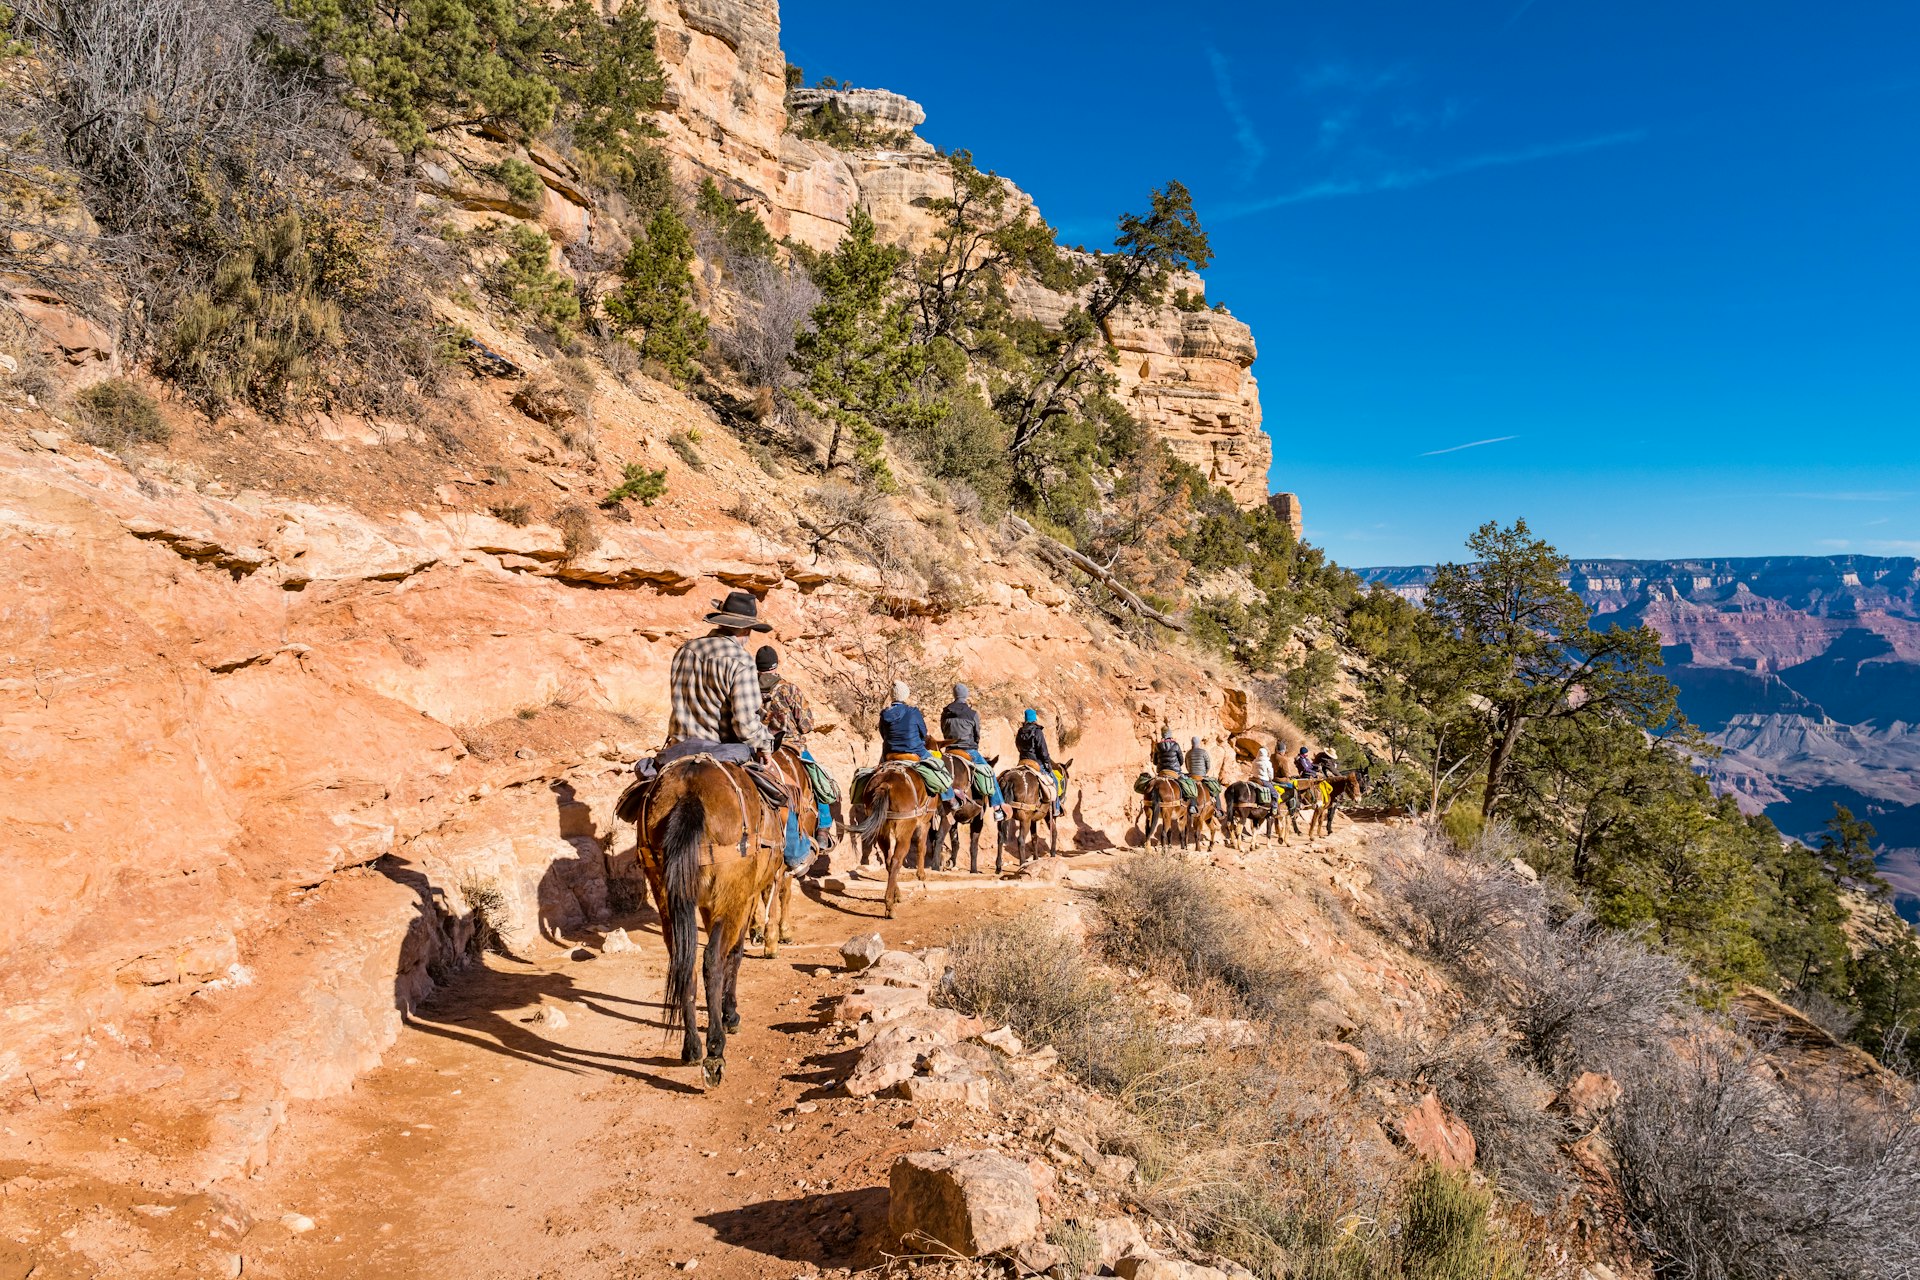 Group of tourists on a mule ride tour through rocky landscape, led by rangers on the Bright Angel Trail in Grand Canyon National Park